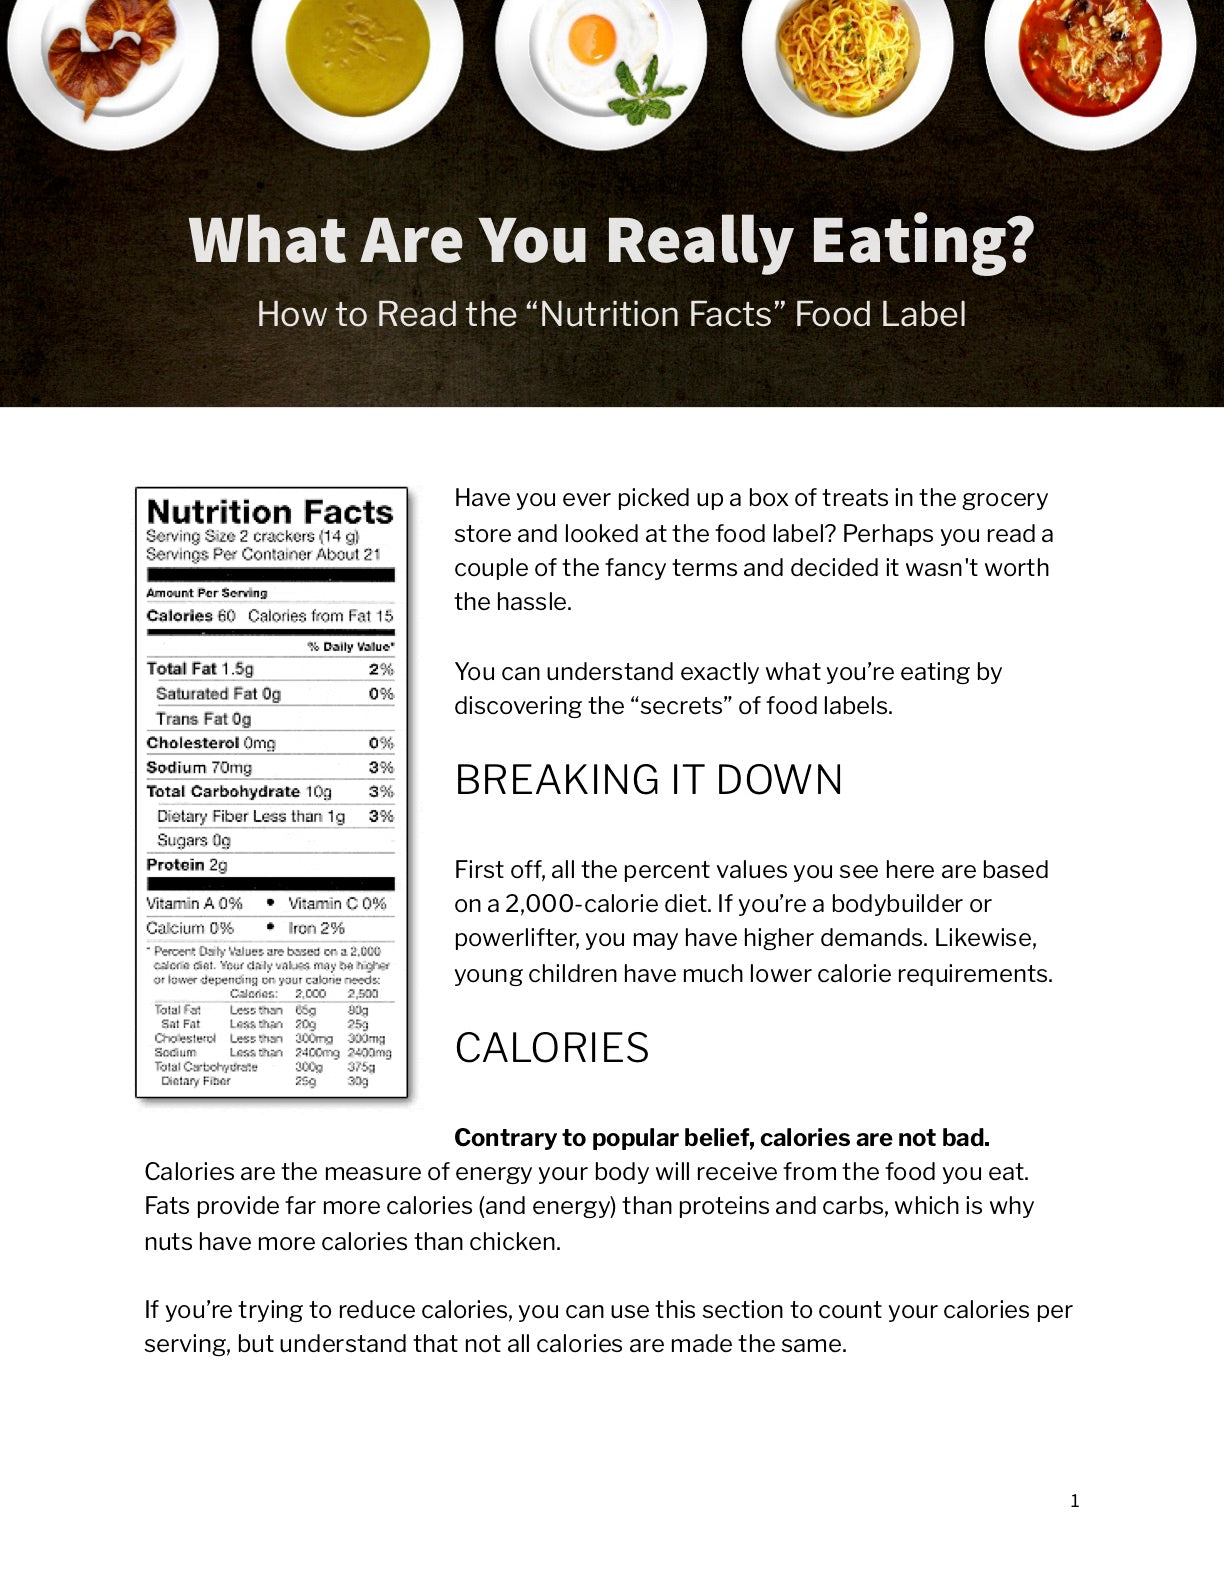 What Are You Really Eating? How To Read the "Nutrition Facts" Food Label